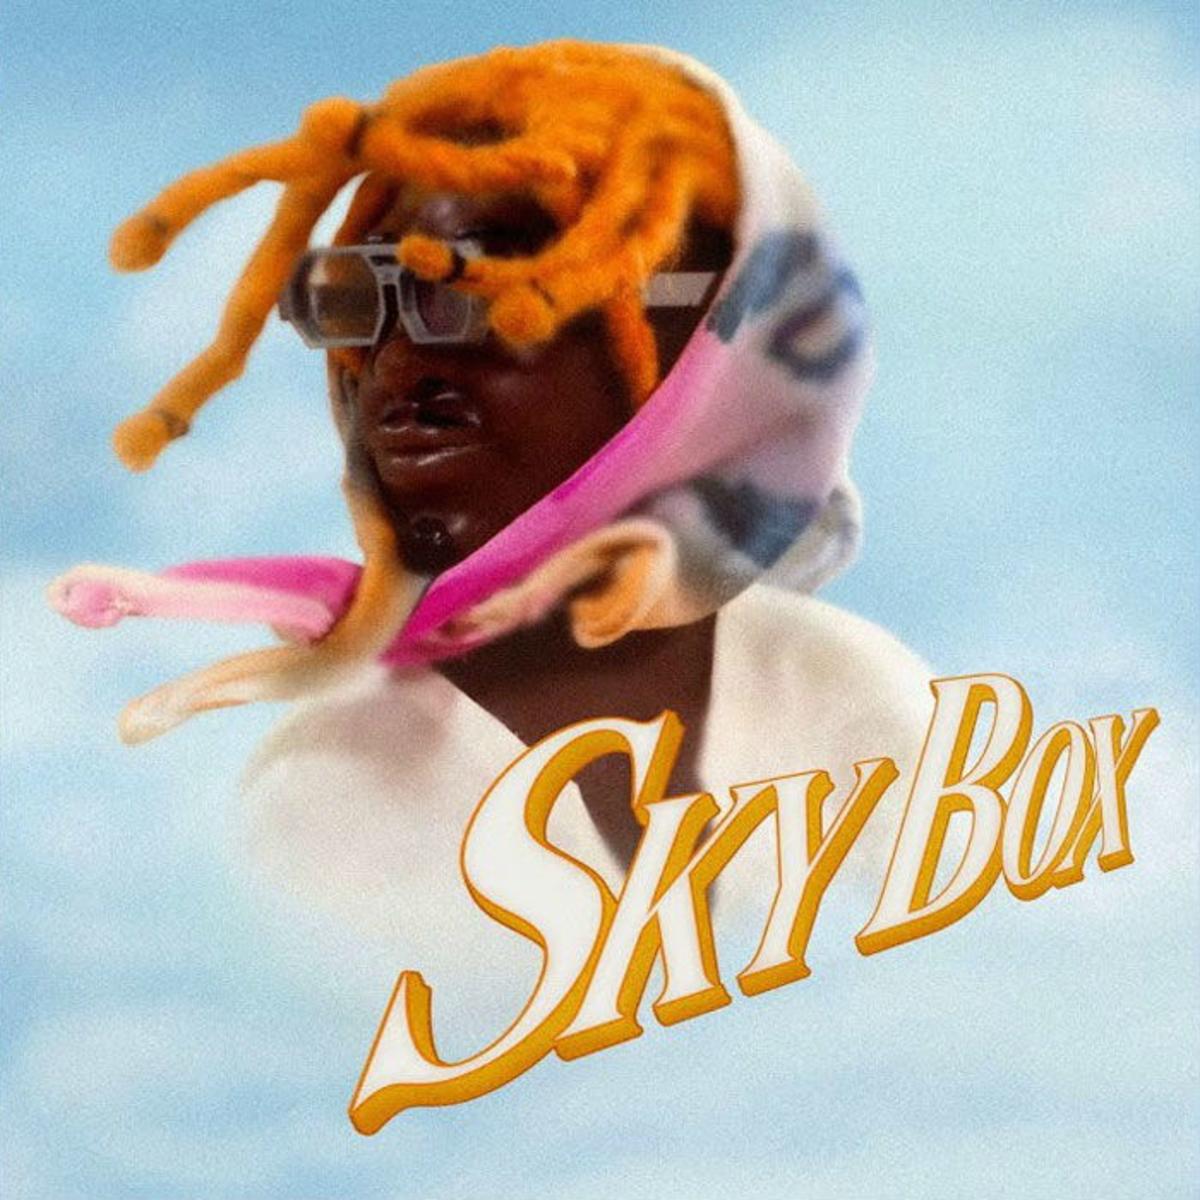 Gunna Stunts His Ass Off In “SkyBox”